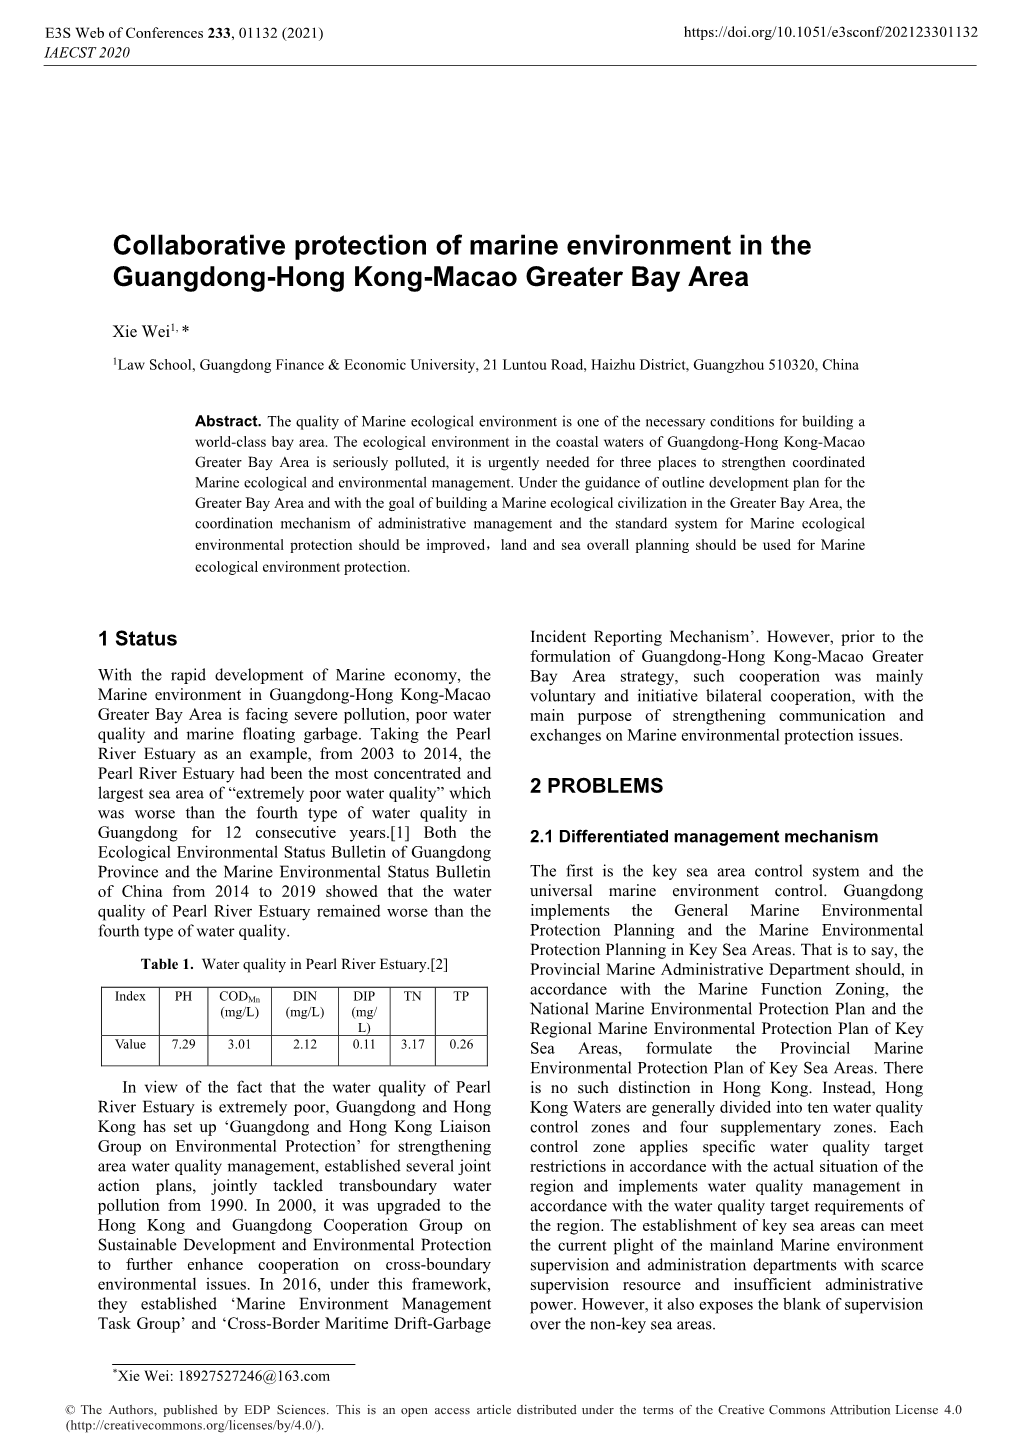 Collaborative Protection of Marine Environment in the Guangdong-Hong Kong-Macao Greater Bay Area